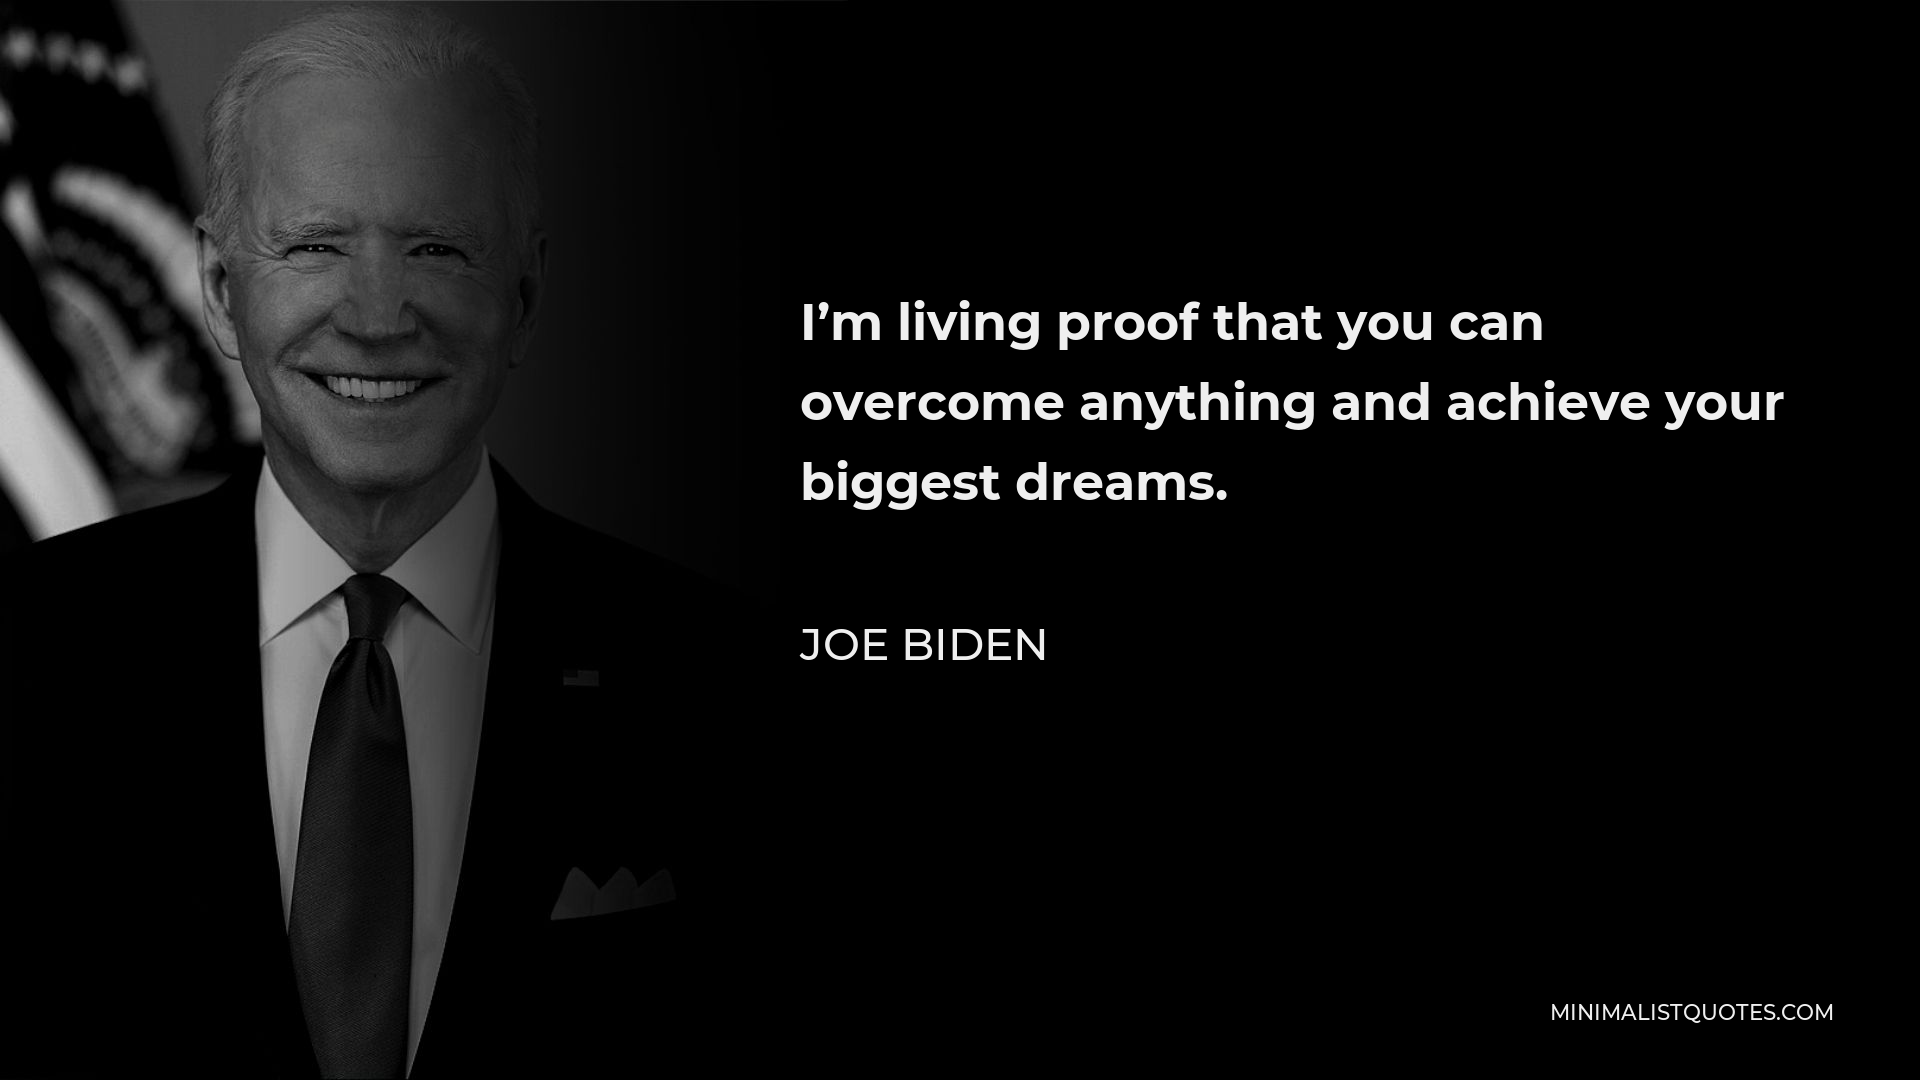 Joe Biden Quote - I’m living proof that you can overcome anything and achieve your biggest dreams.